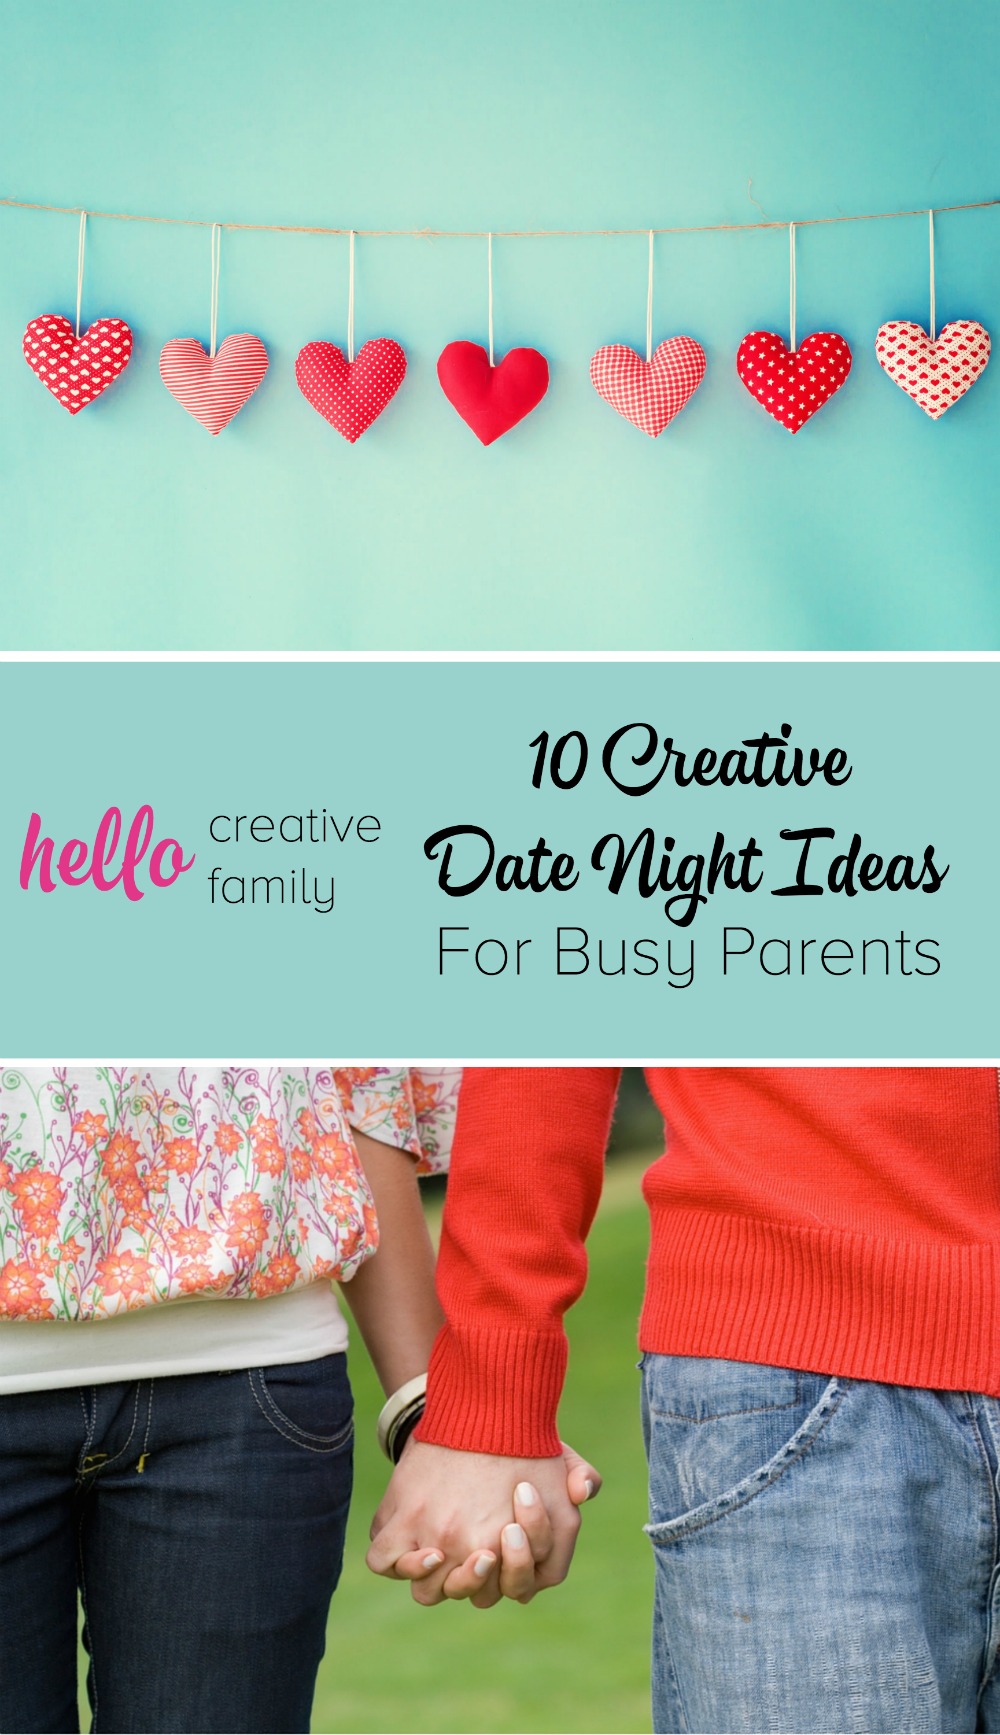 10 Creative Date Night Ideas for Busy Parents Hello Creative Family